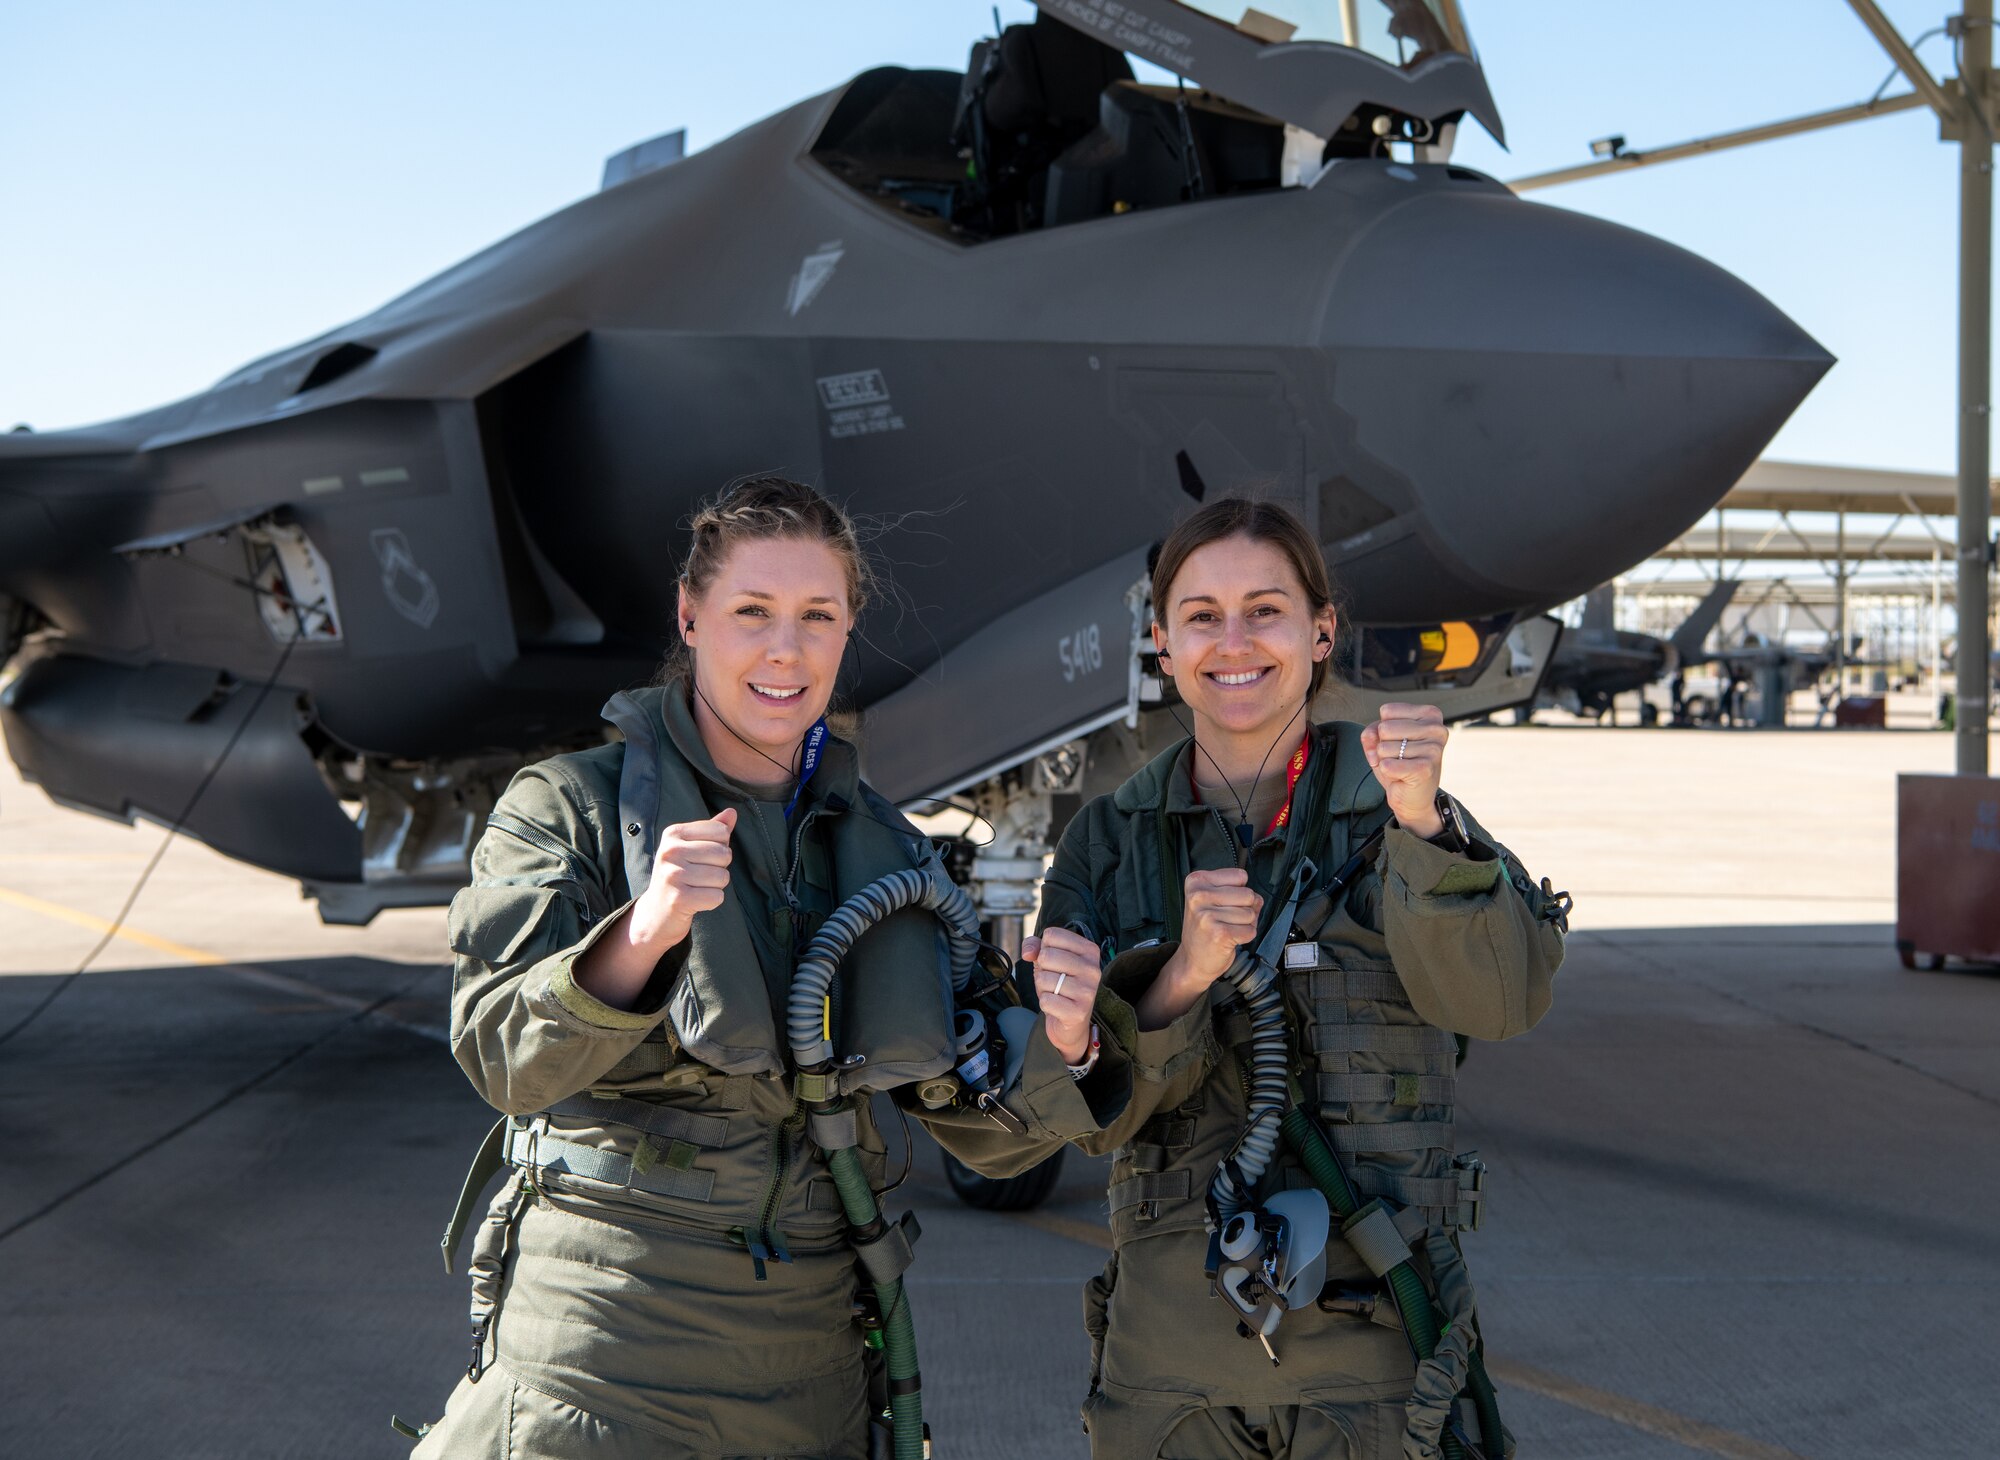 U.S. Air Force Capt. Sara Eagle (left), F-35 student pilot and U.S. Air Force Capt. Melanie Kluesner (right), 62nd Fighter Squadron F-35 instructor pilot, pose for a photo before a sortie at Luke Air Force Base, Arizona, Mar. 28, 2023.